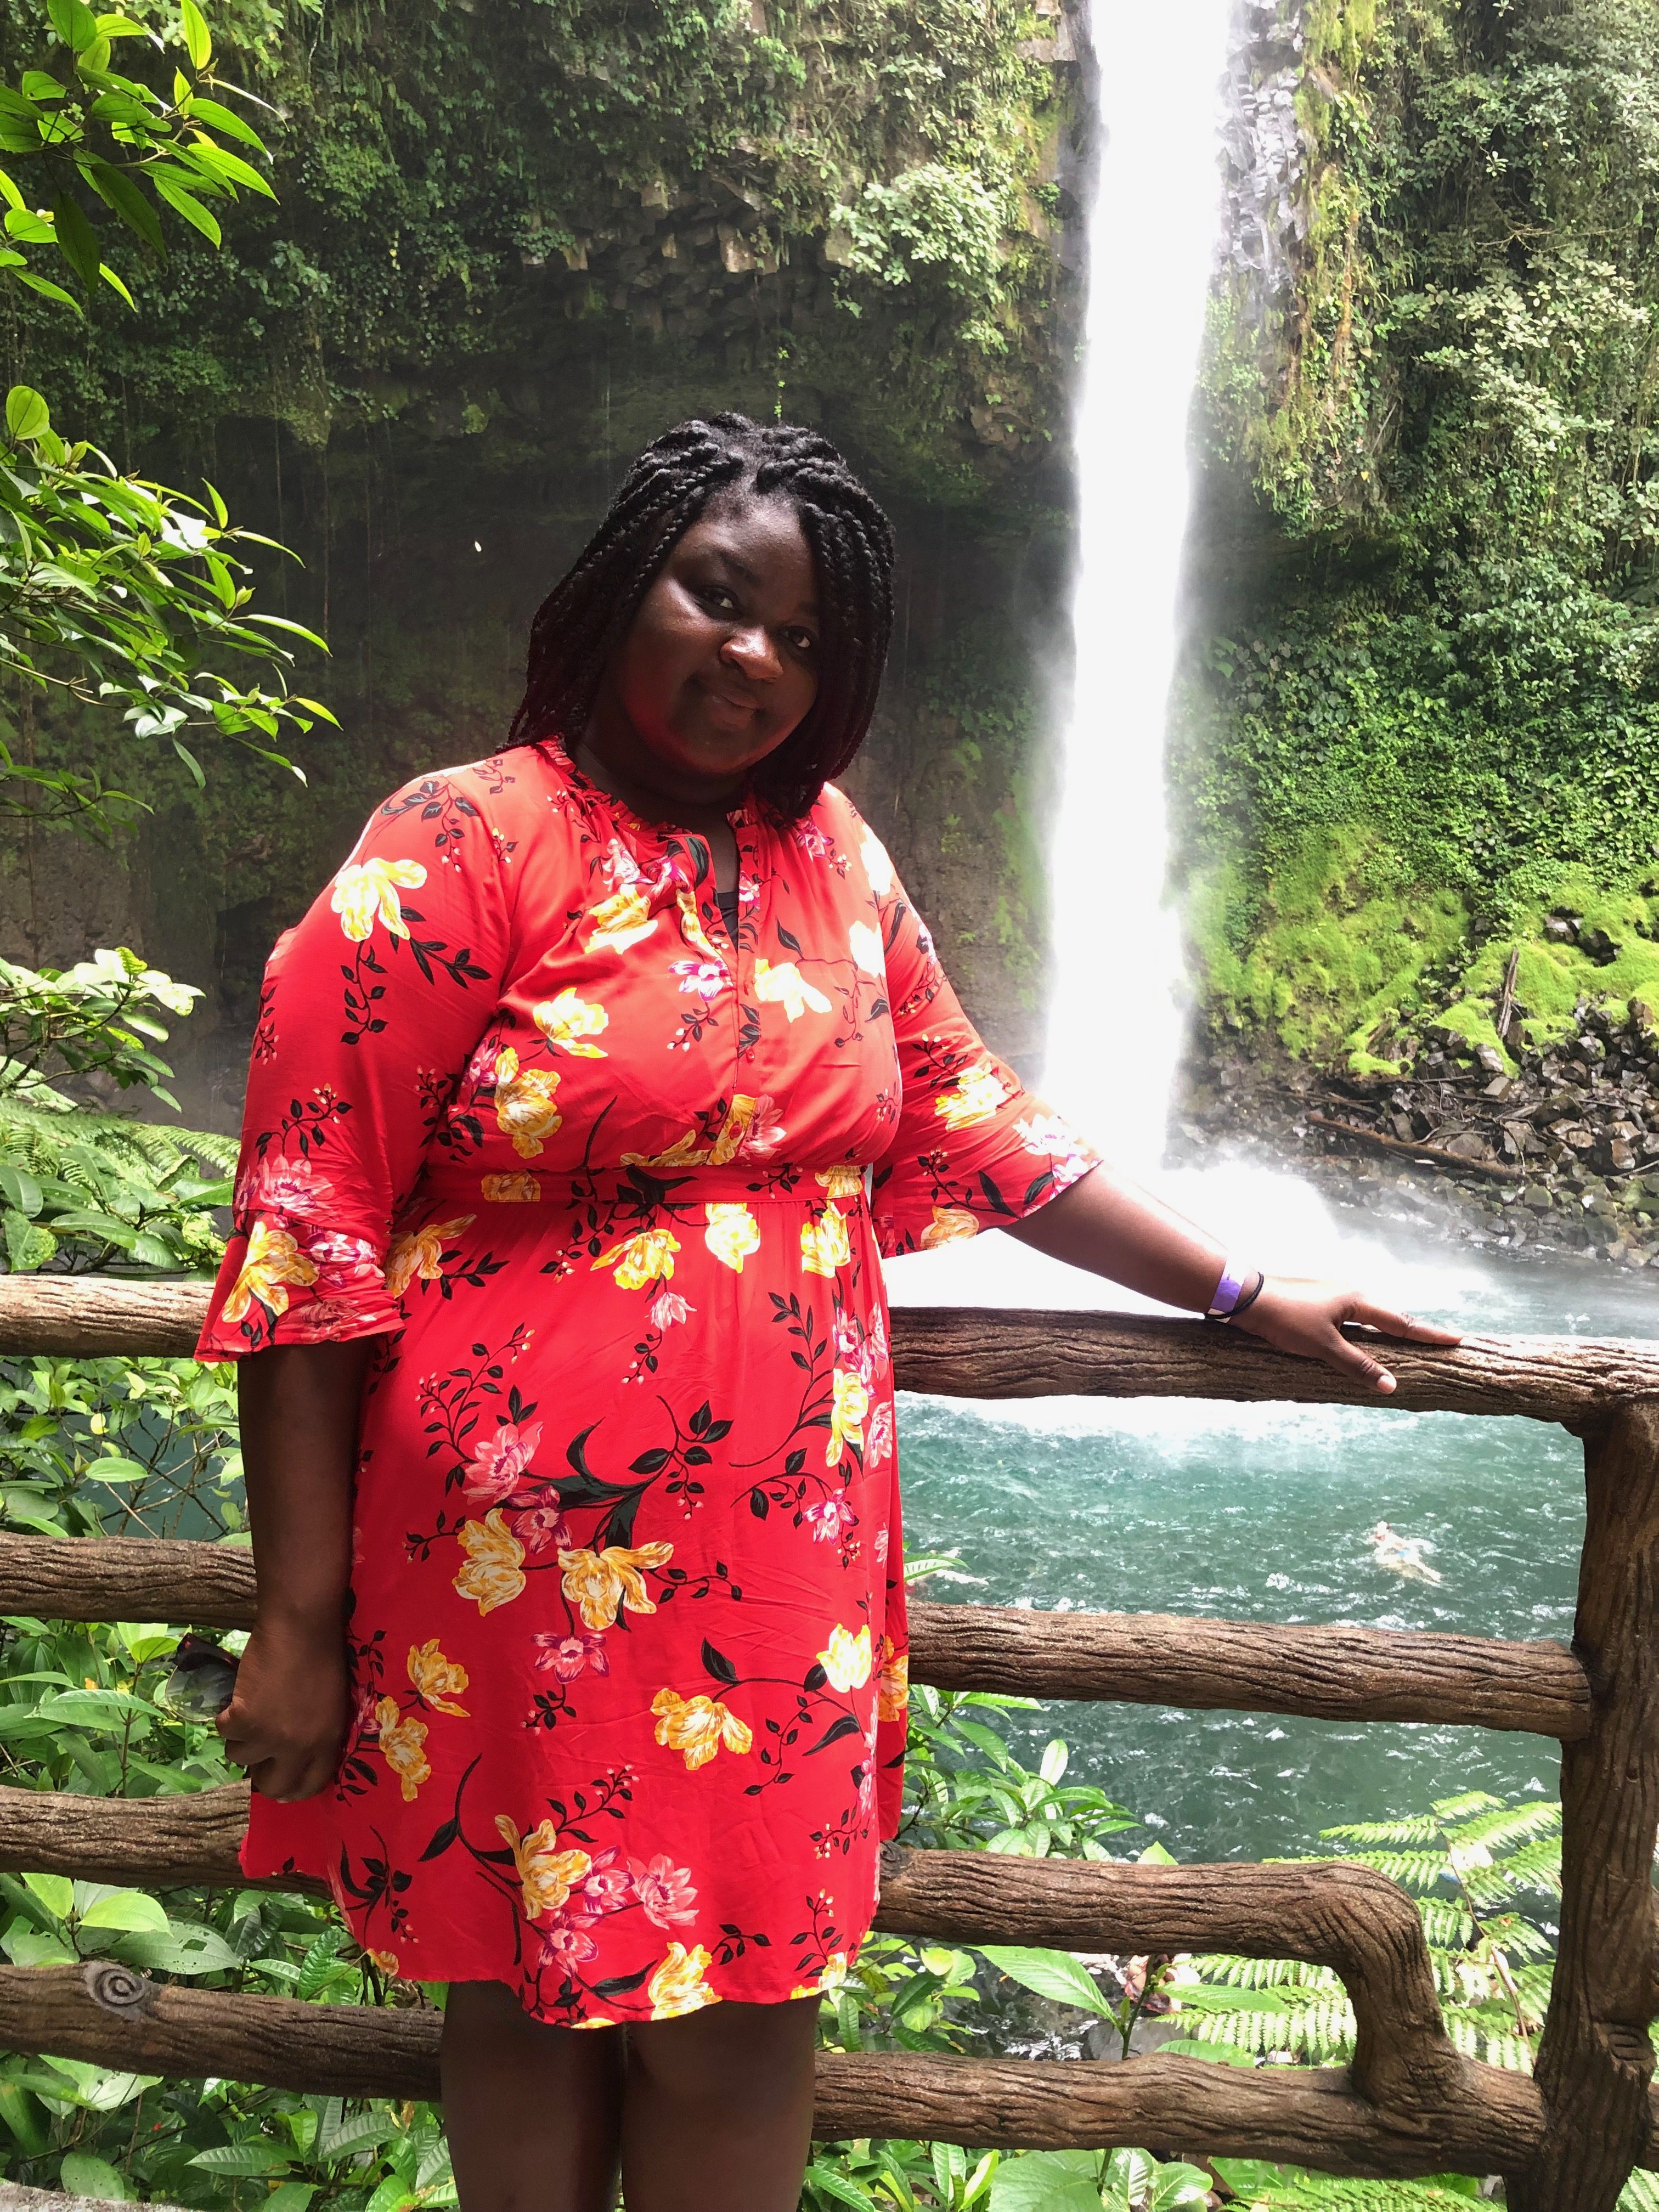 Follow this Spring 2019’s Office of Study Abroad & International Experiences Global Correspondent, Melinda Duah, on her studies in San Jose, Costa Rica! Melinda is a UMass Lowell Public Health major studying this spring on a UMass Lowell partner-led study abroad program, AIFS Study Abroad in San Jose, Costa Rica.